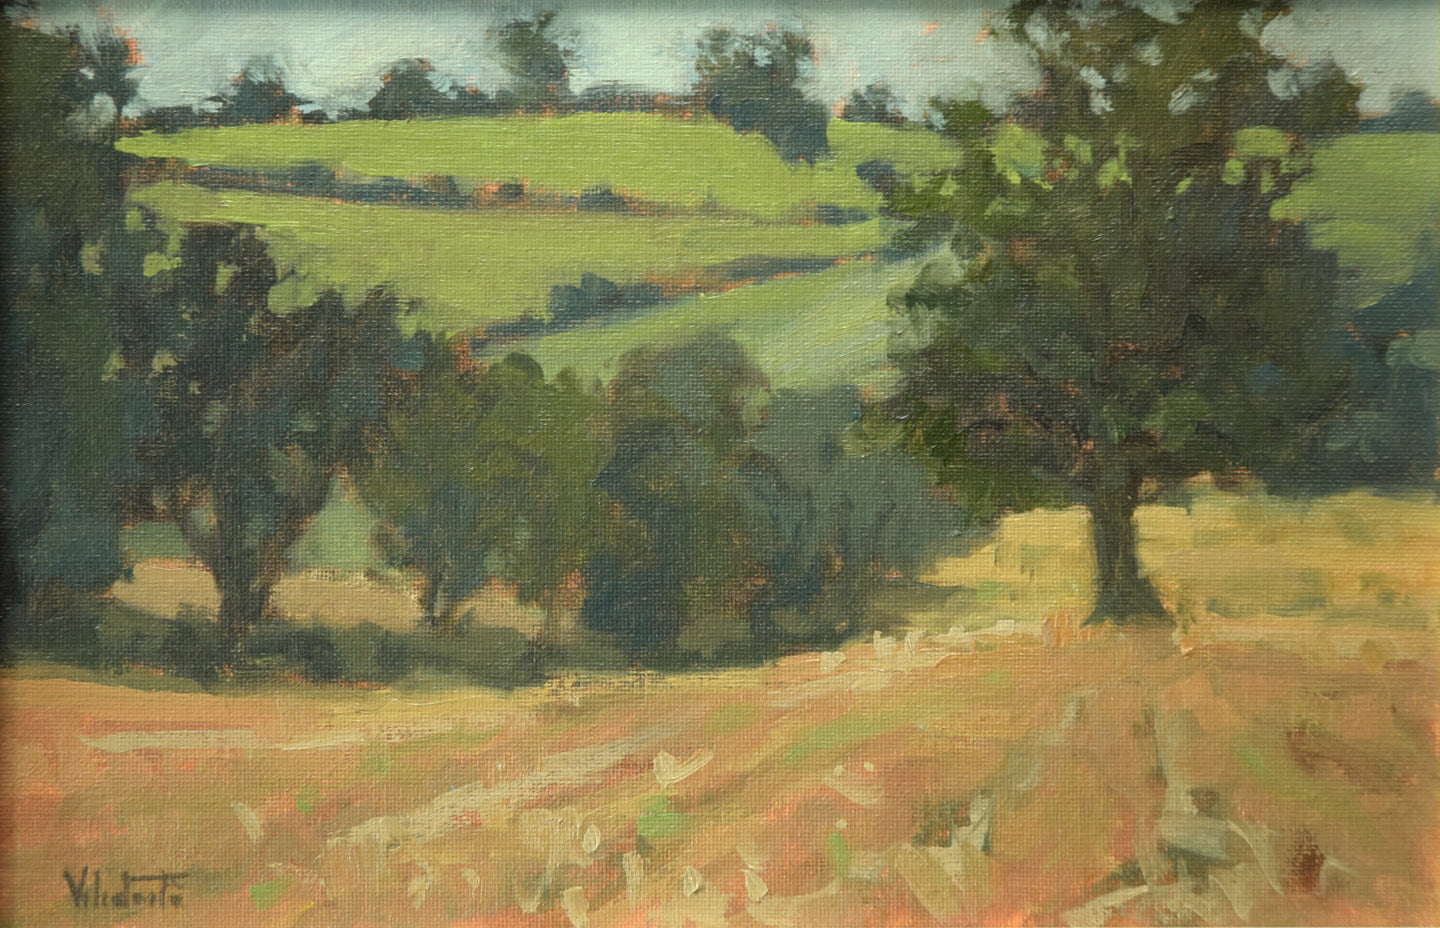 8 x 12 inch oil painting of a golden stubble field with a row of trees taking the eye down a hill and a large Oak tree in the right middle distance, more trees in the far distance.